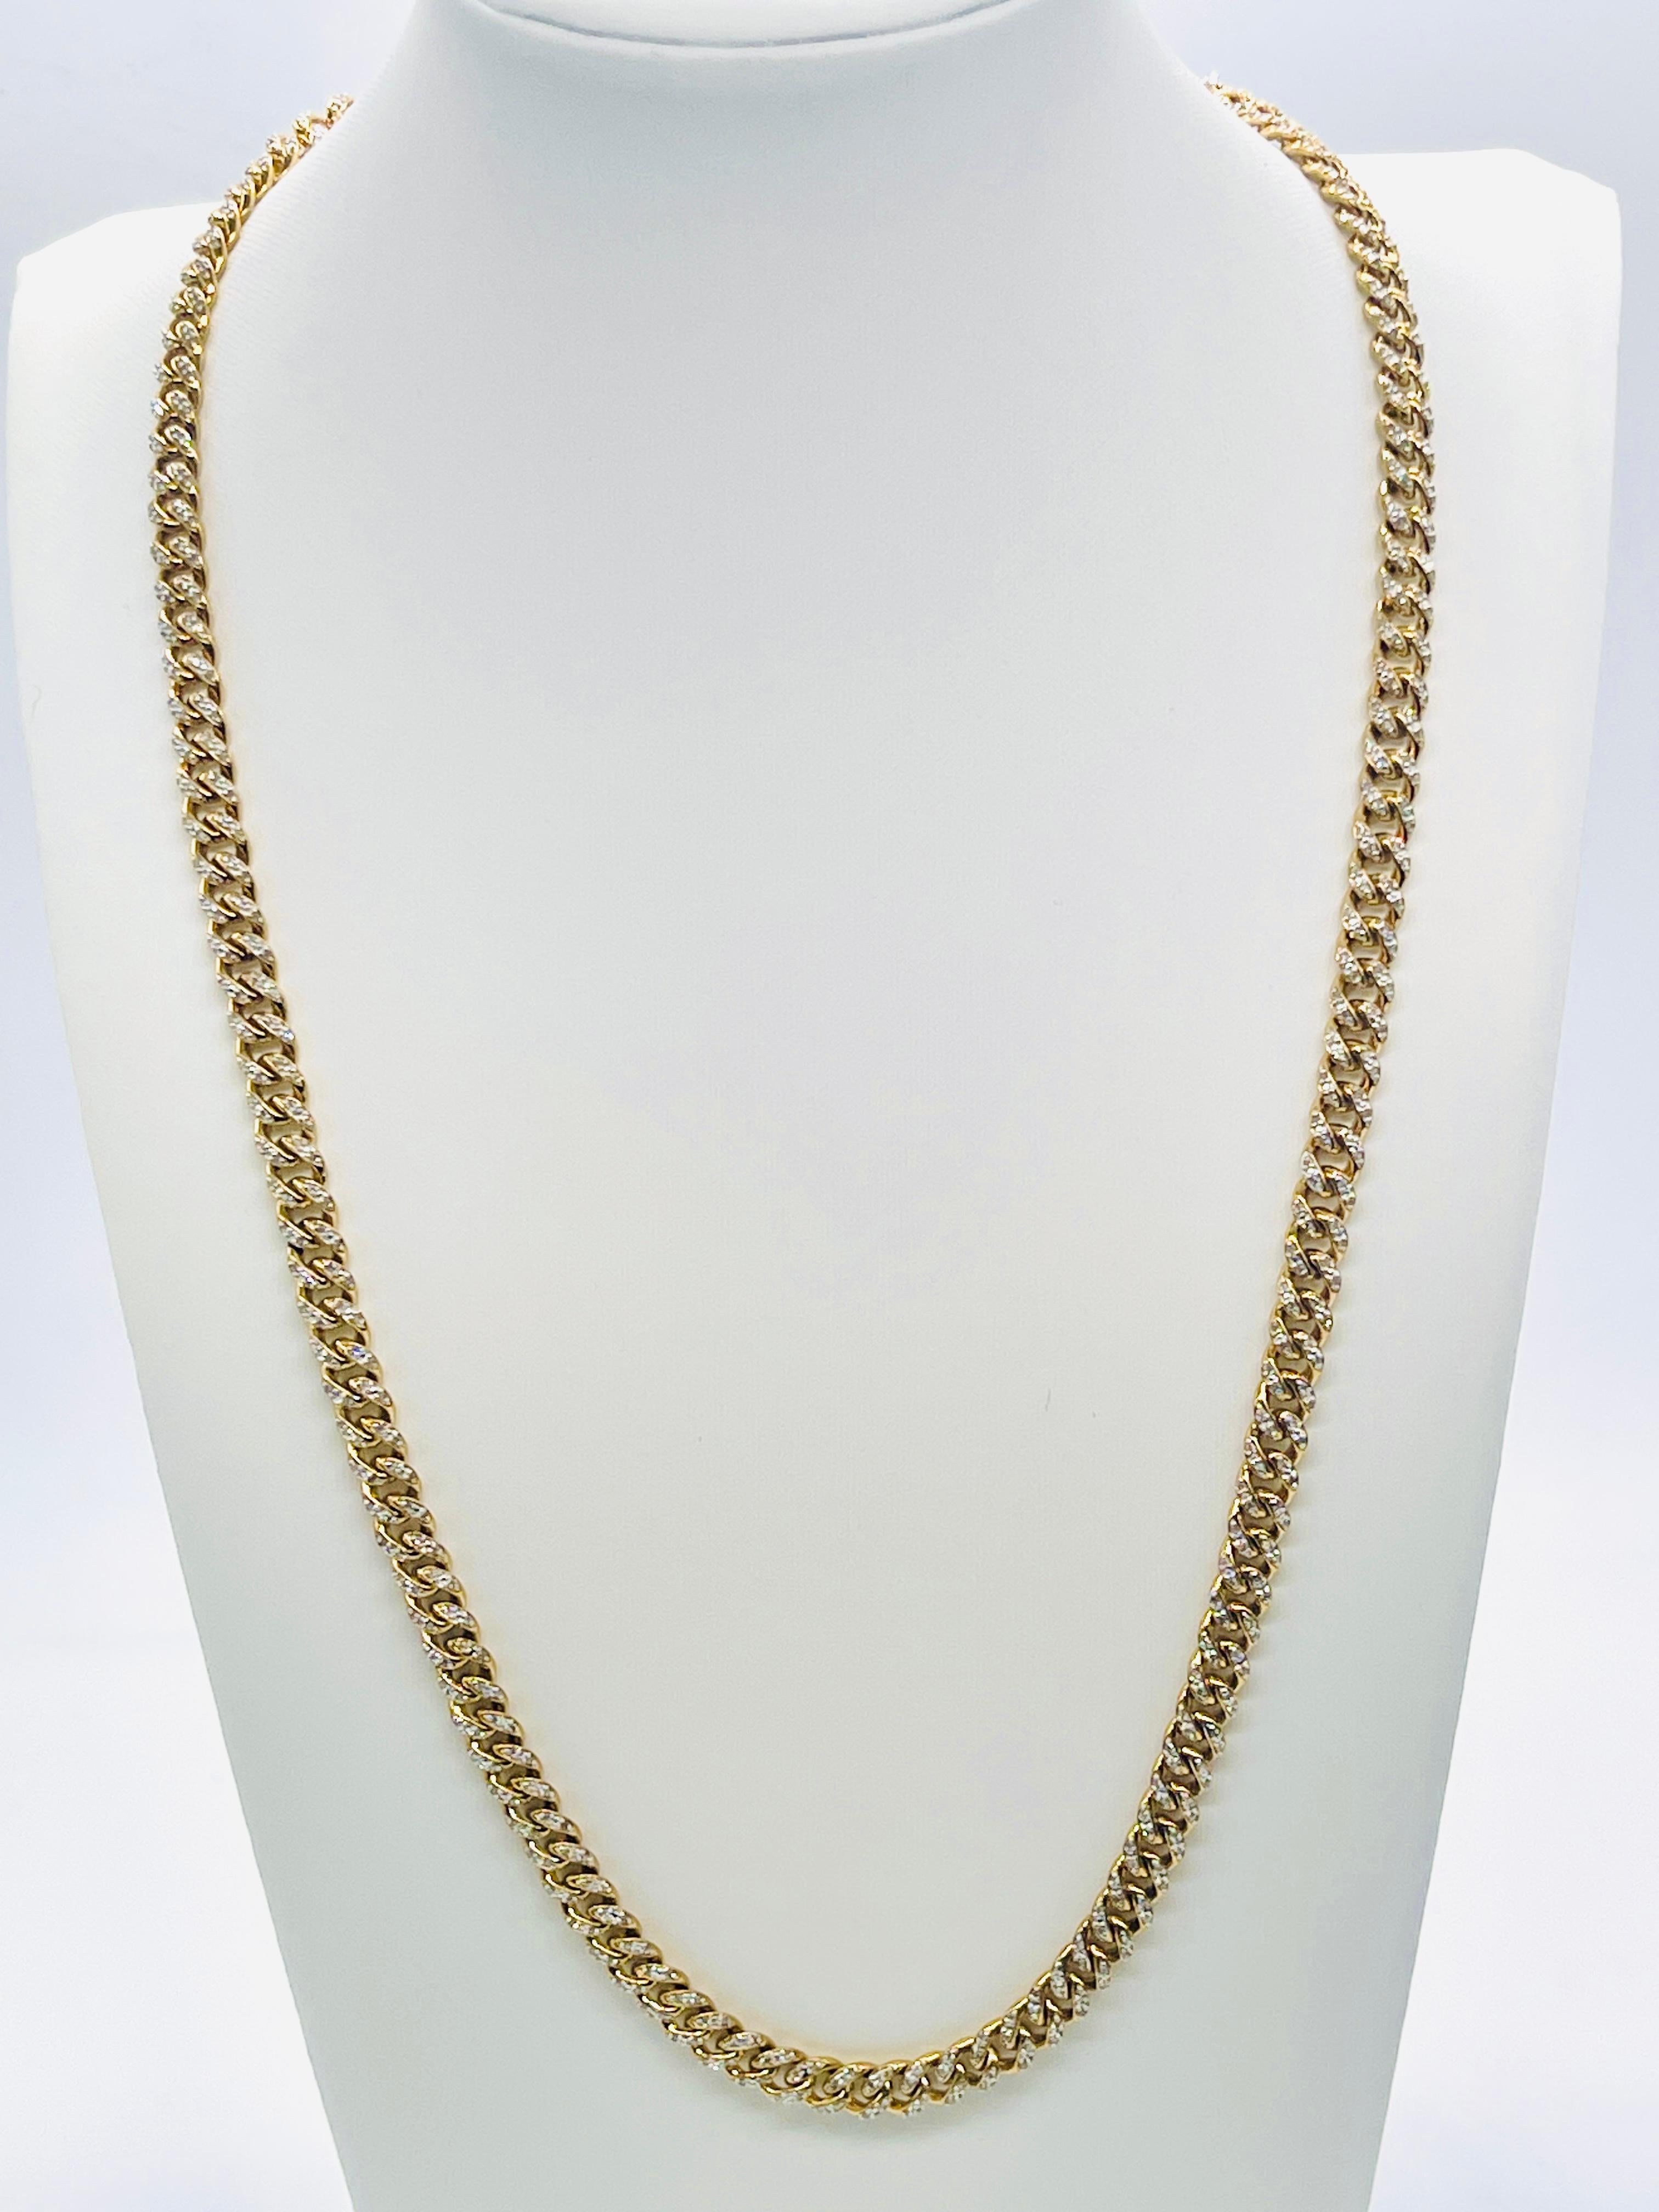 Dazzling and elegant 10K gold with fully rhodium on top, adorned with 2.05 carats all natural diamonds cuban link chain necklace in 22 inch length, 6mm width average G-I, 48.60 grams.

*Free shipping within the U.S.*